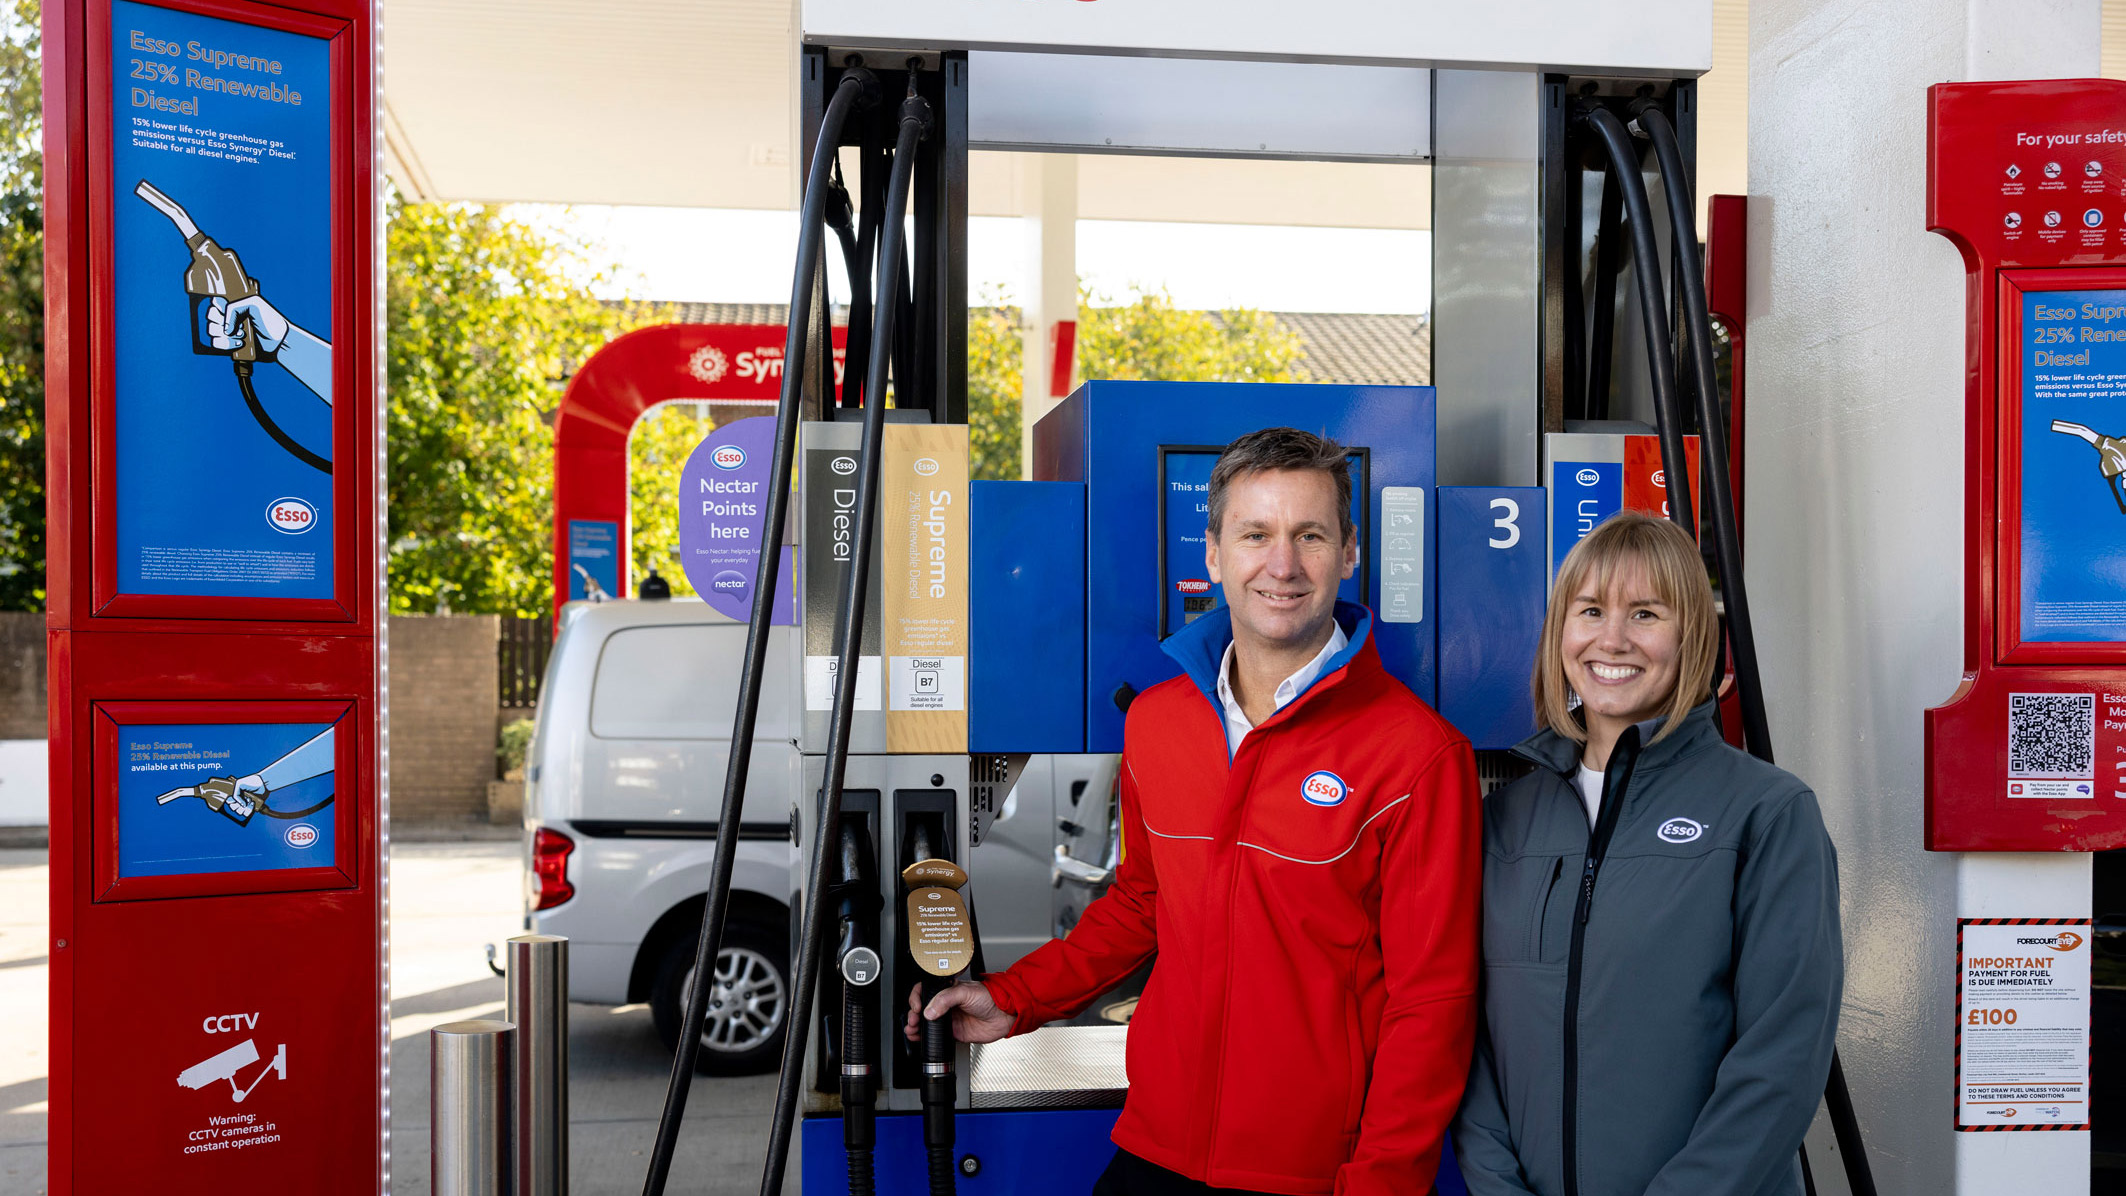 Image Testing the retail fuel market for renewable demand, Pat Rutherford, UK  Norway retail channel manager, and Laura Michell, product development advisor.